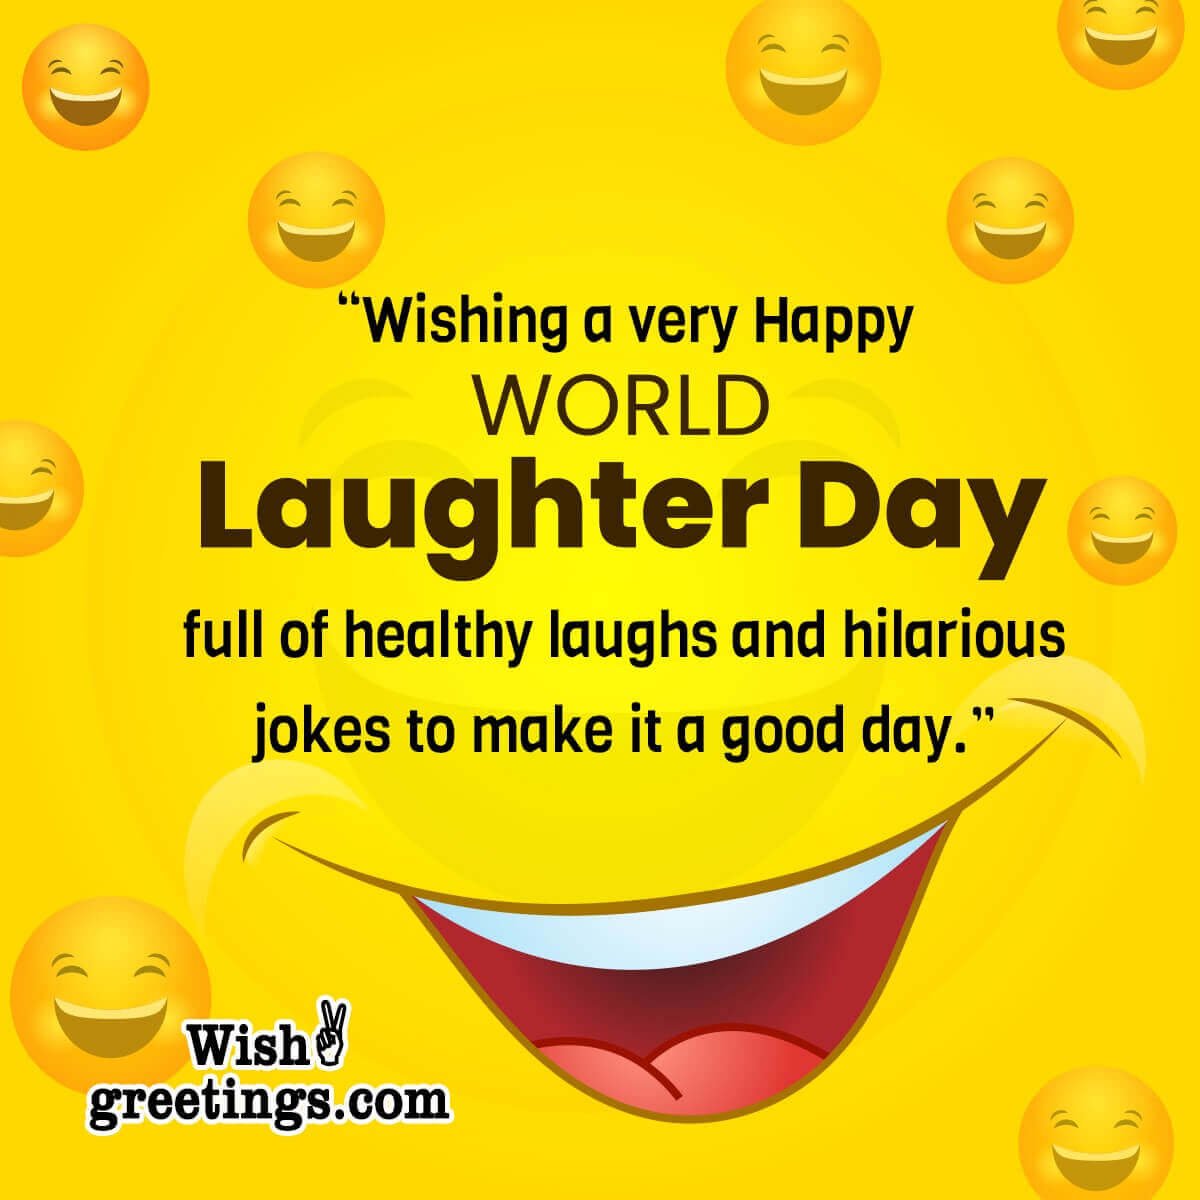 World Laughter Day Message Photo